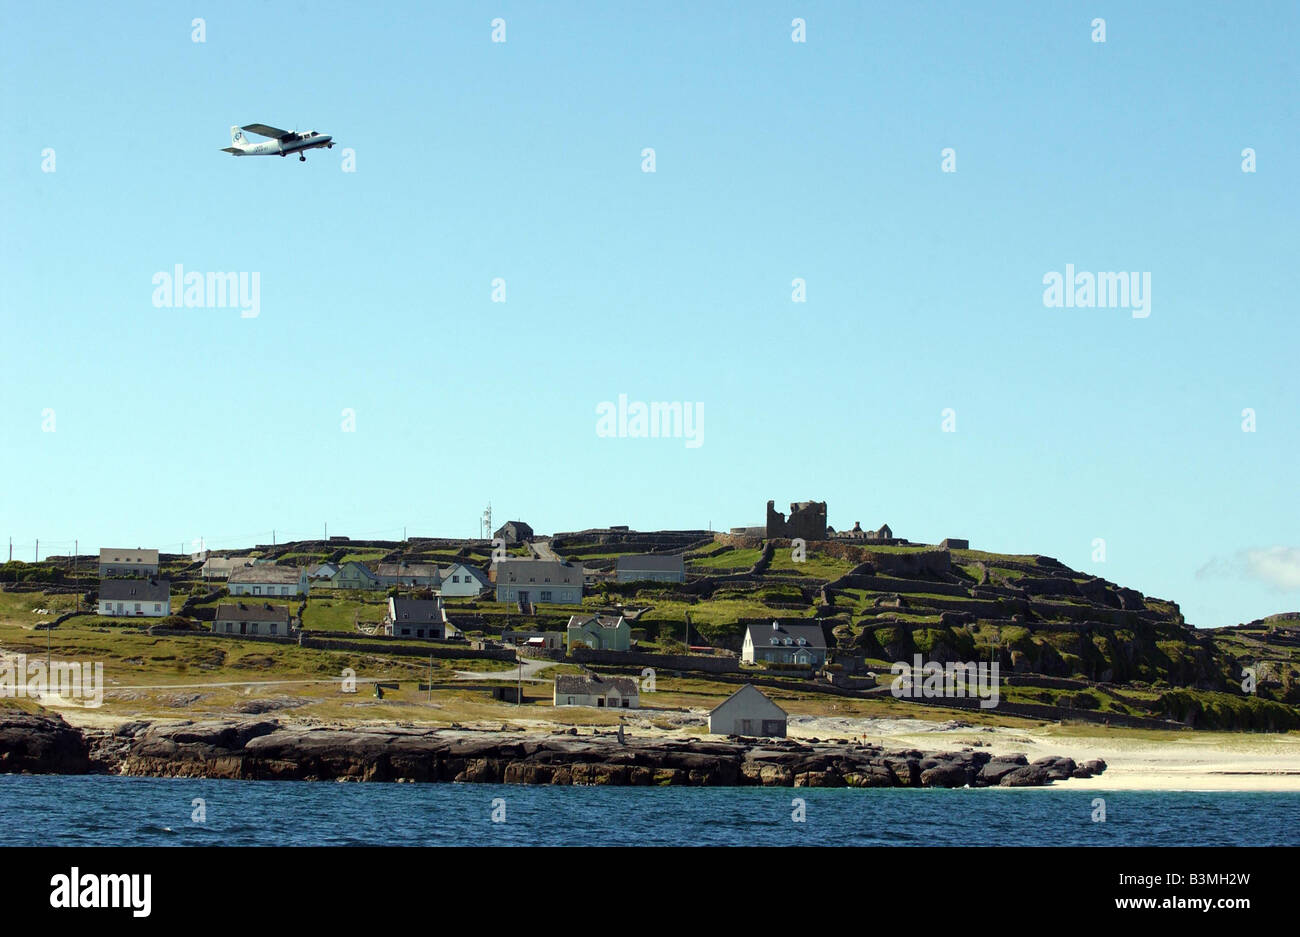 A plane taking off on Inis Oirr Aran Islands Galway Ireland Island Stock Photo